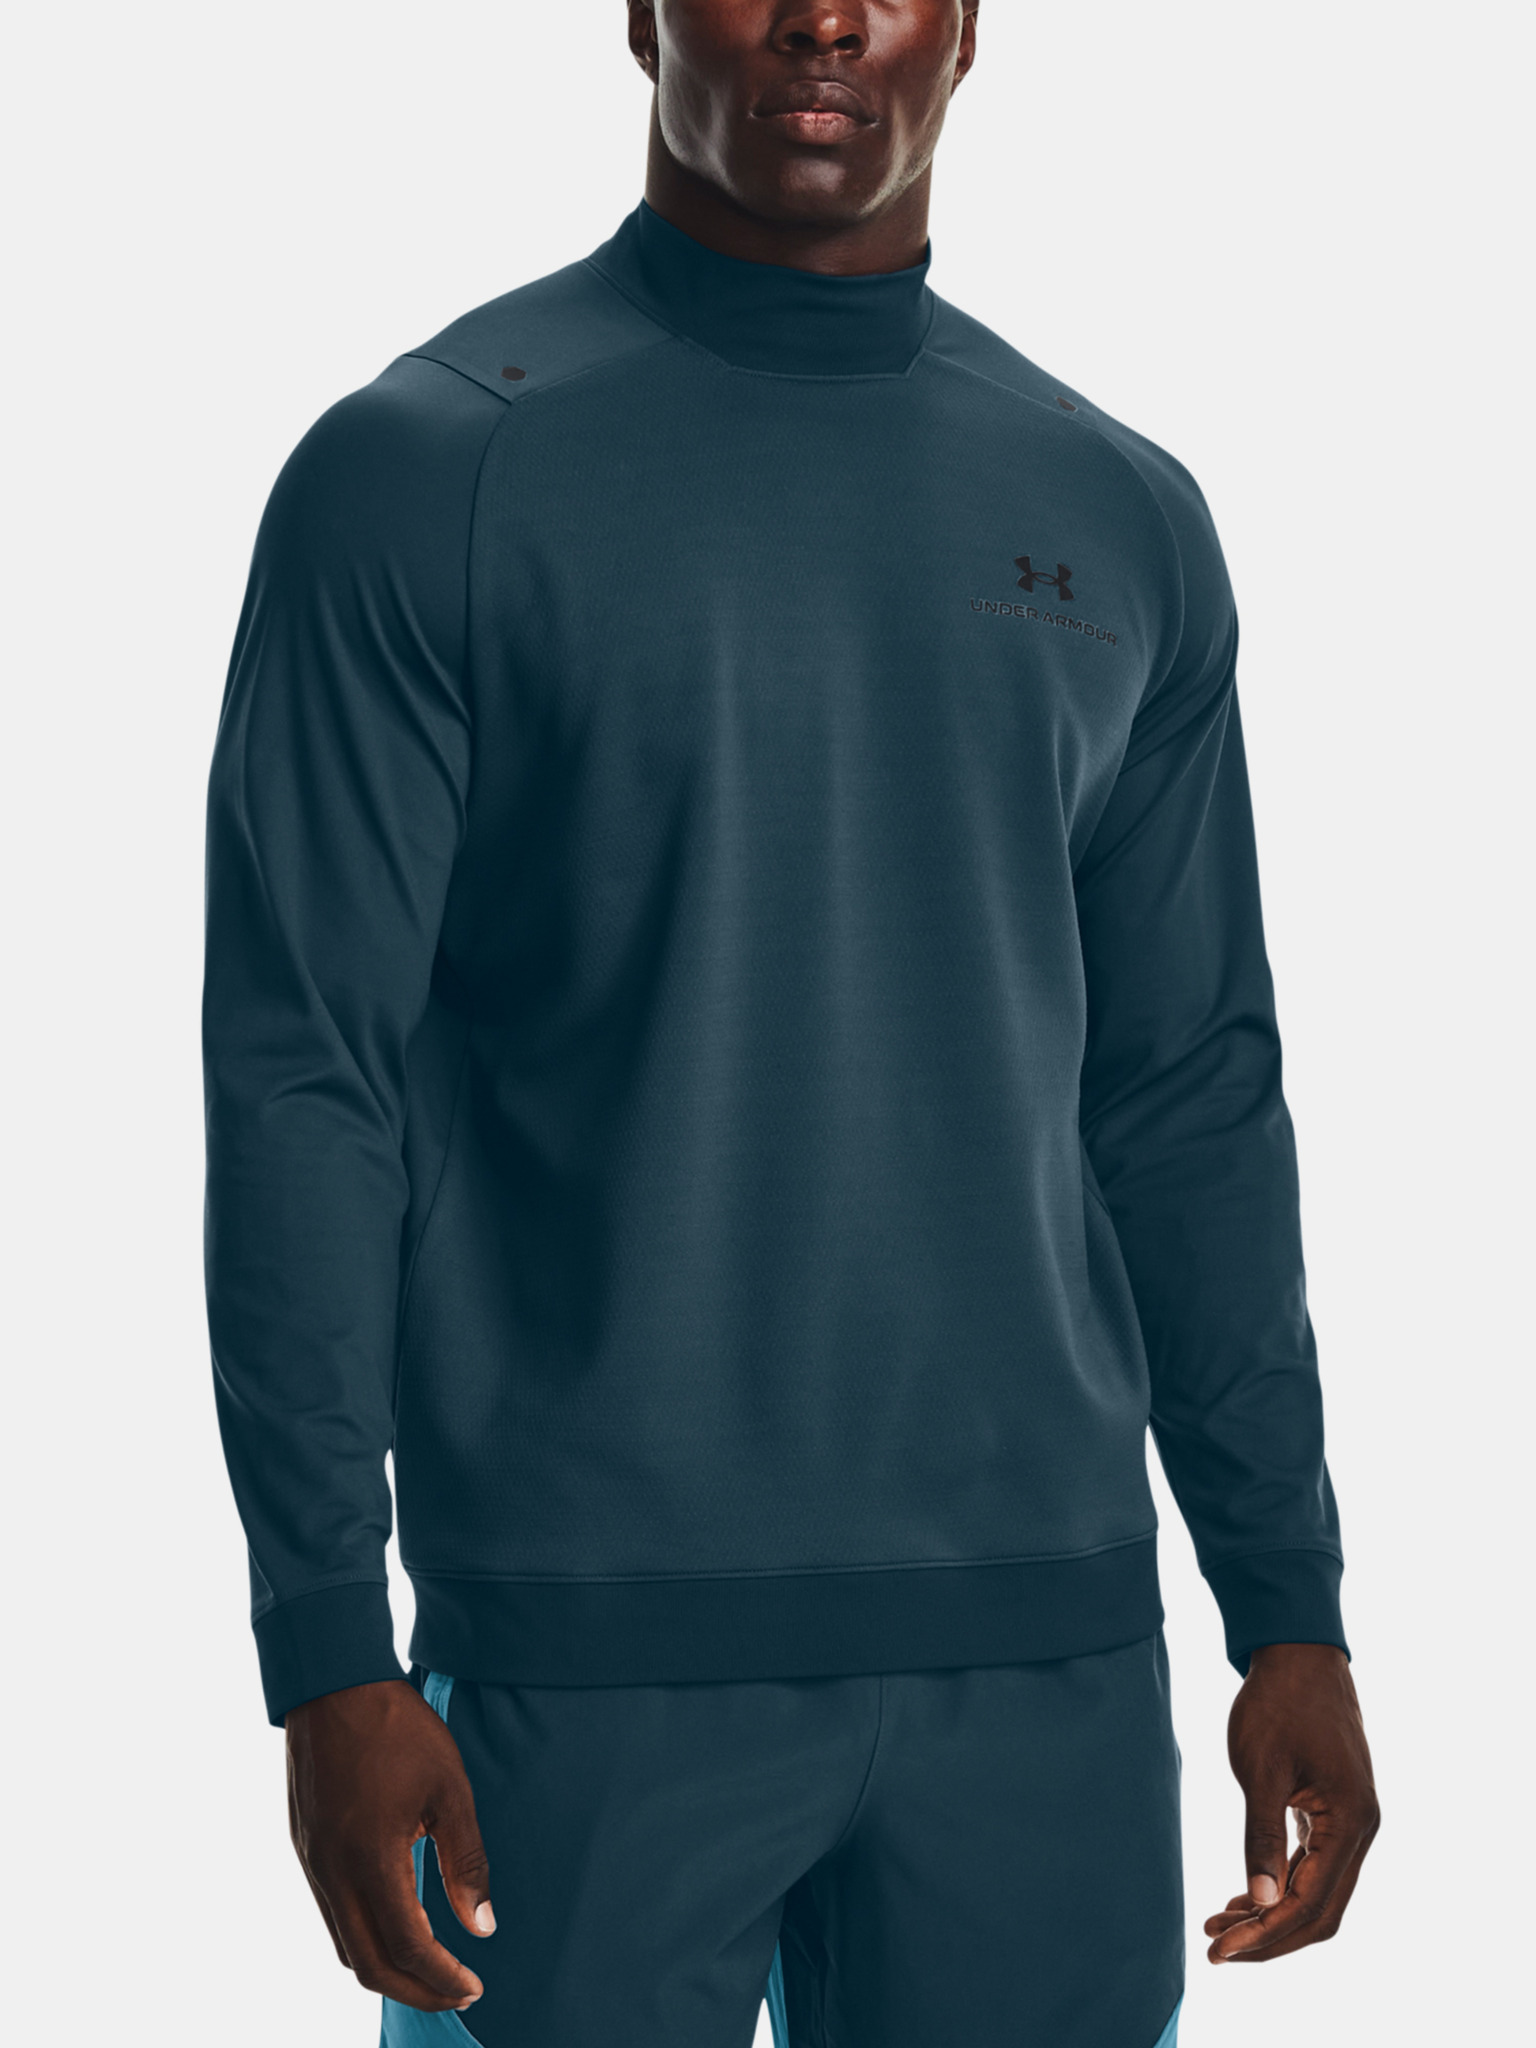 Under Armour Rush Coldgear Seamless Hooded Top - Men's - Clothing